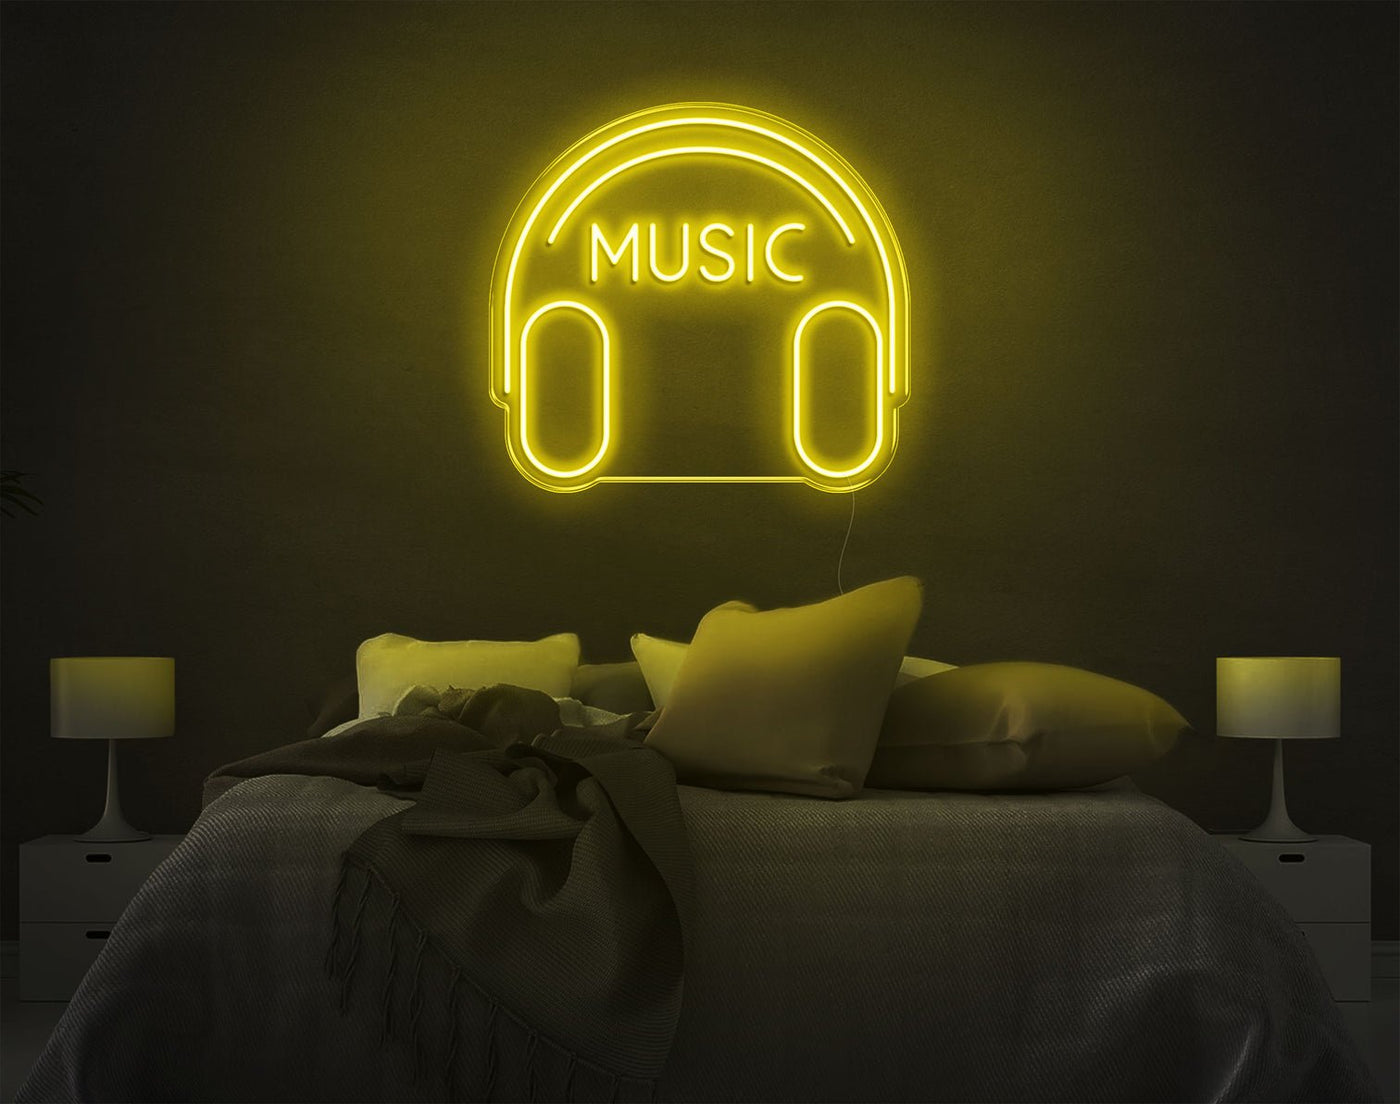 Music V2 LED Neon Sign - 19inch x 20inchYellow